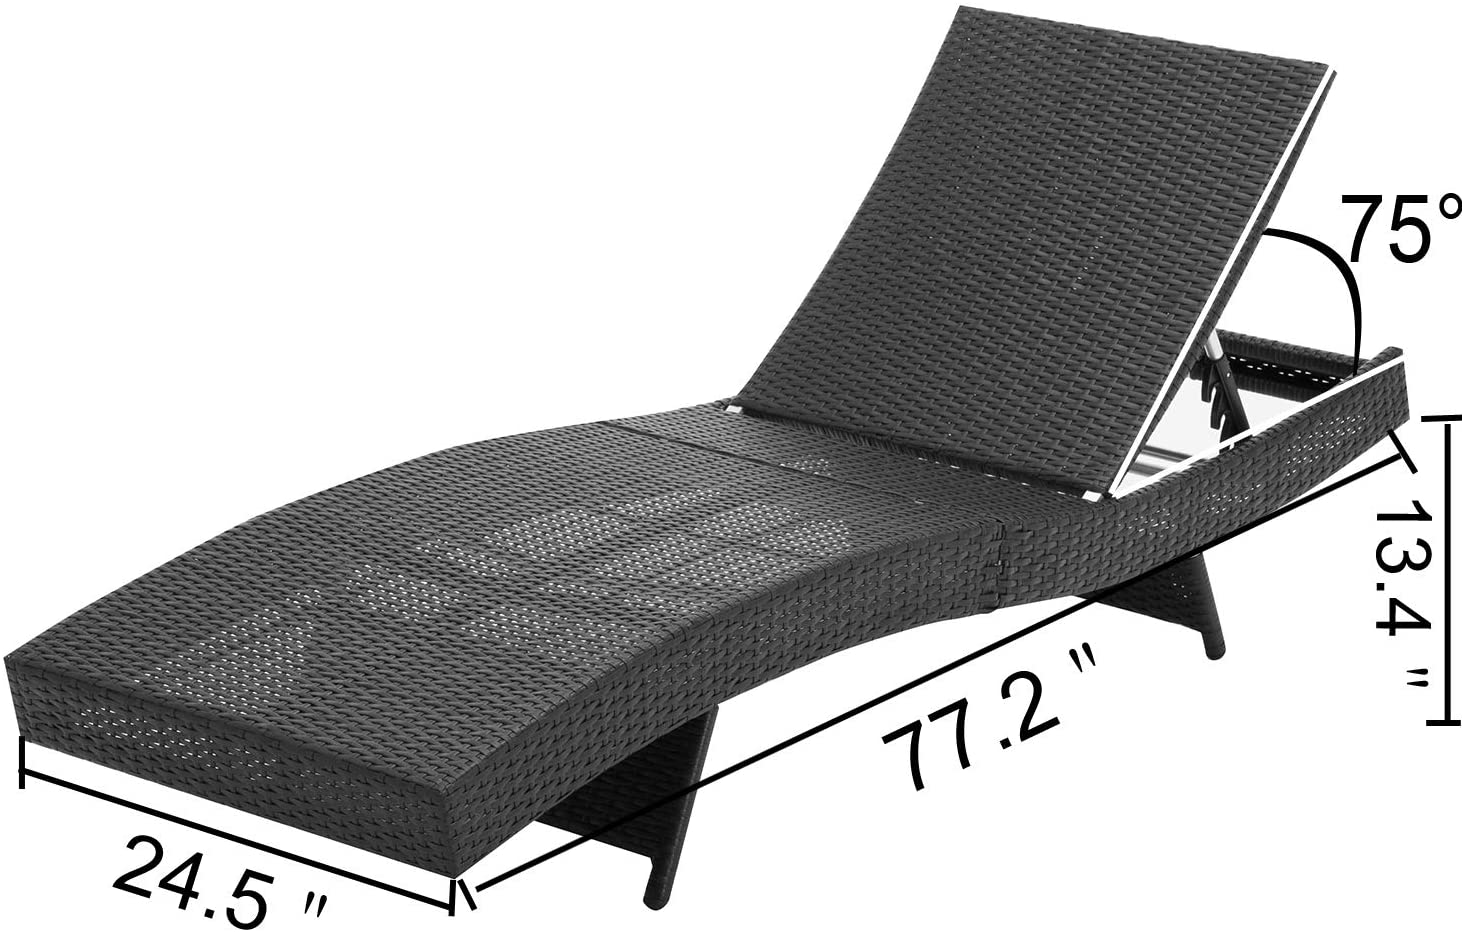 Mcombo Black Wicker Lounge Chaise Patio Outdoor Adjustable Reclining Chair 6082-LCBK-2 - image 5 of 7